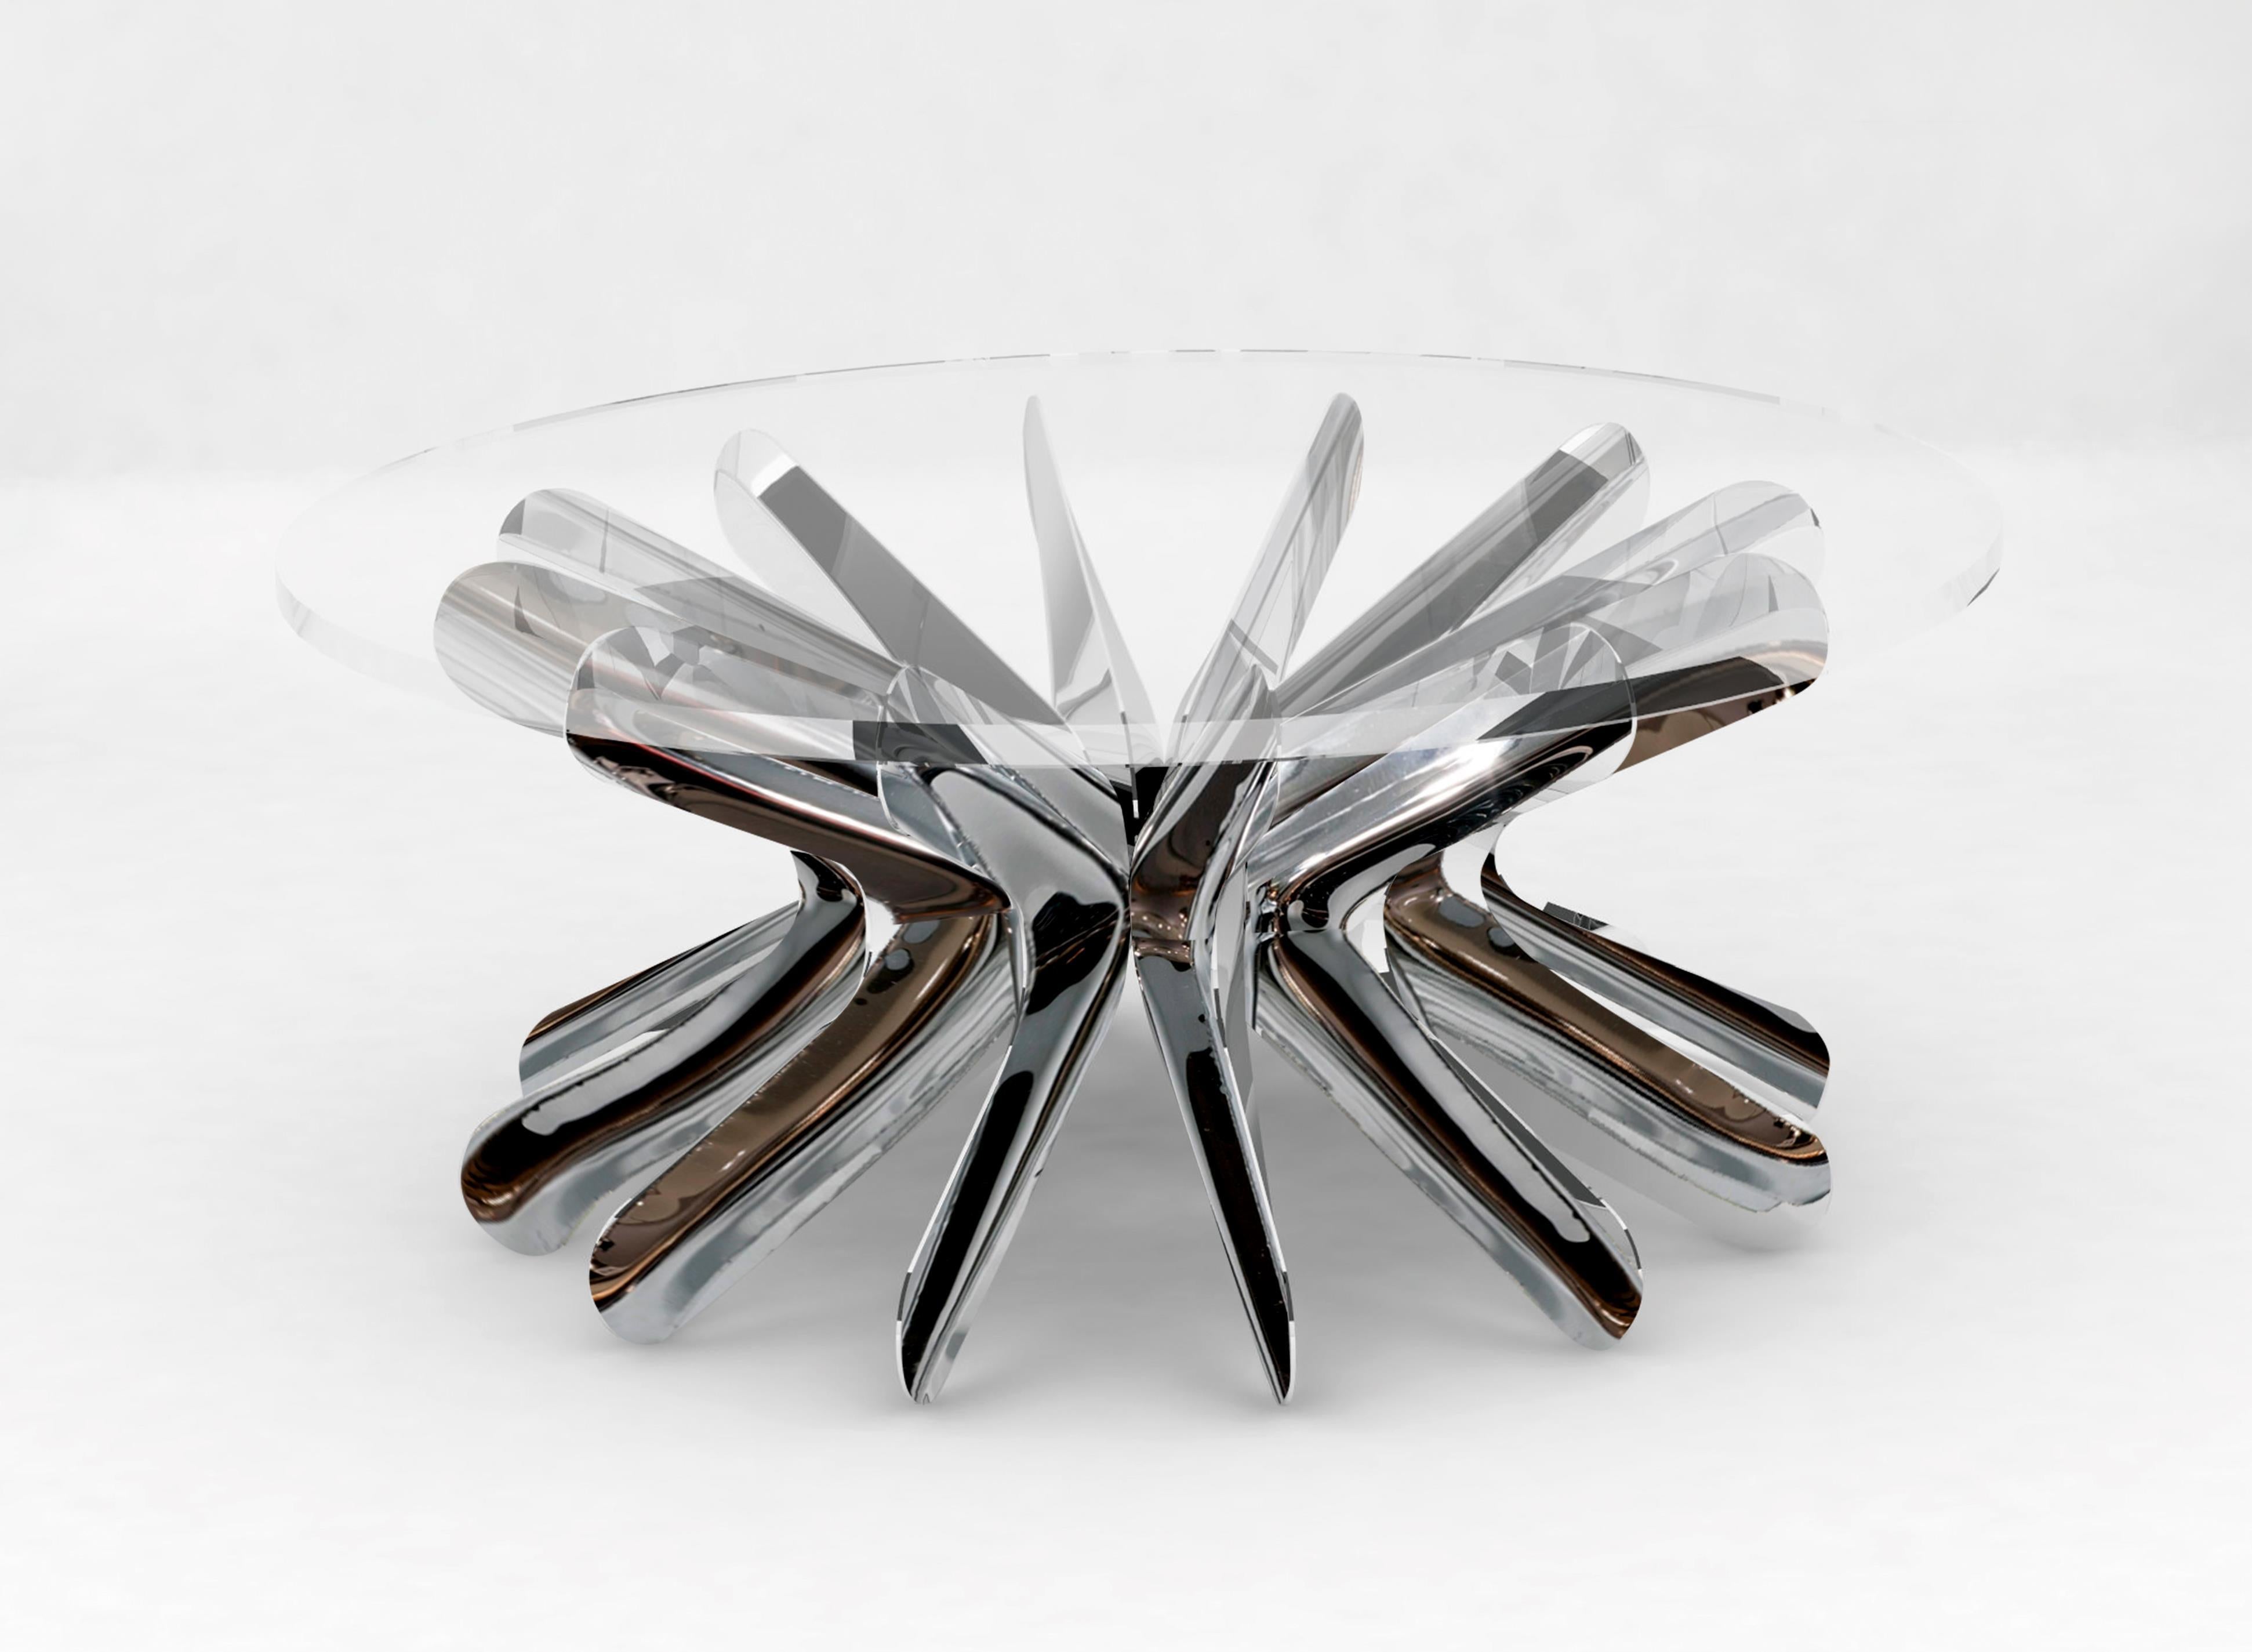 Coffee table in lacquered copper (limited edition), Zieta
Dimensions:
H 14.57 in. x diameter 47.25 in.
H 37 cm x diameter 120 cm
Material: Lacquered copper and glass tabletop.

About Zieta: 

Zietas main goal is to deliver uniqueness and